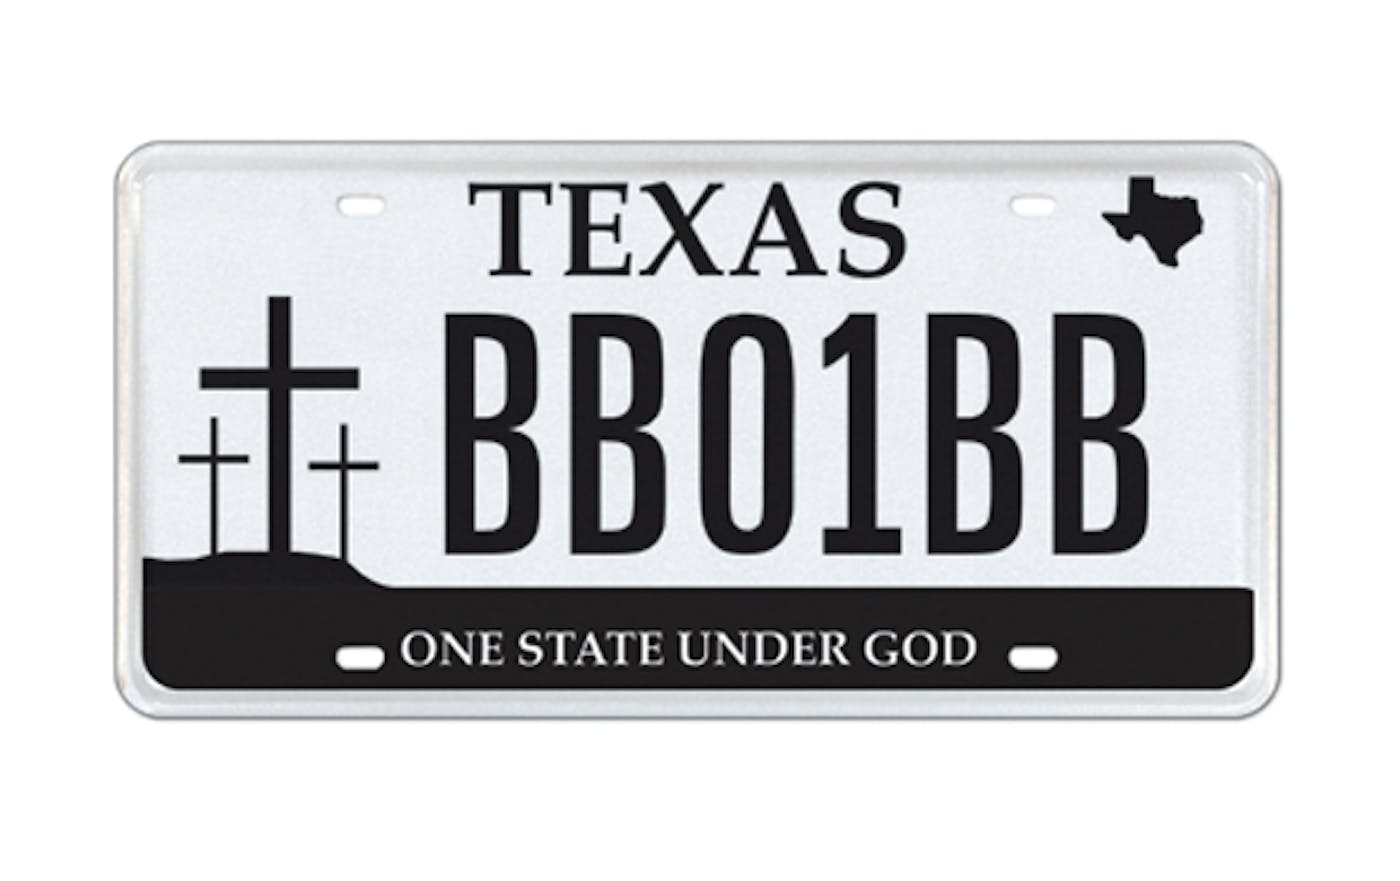 Can Texans use vowels and symbols on their license plates? Curious Texas  investigates